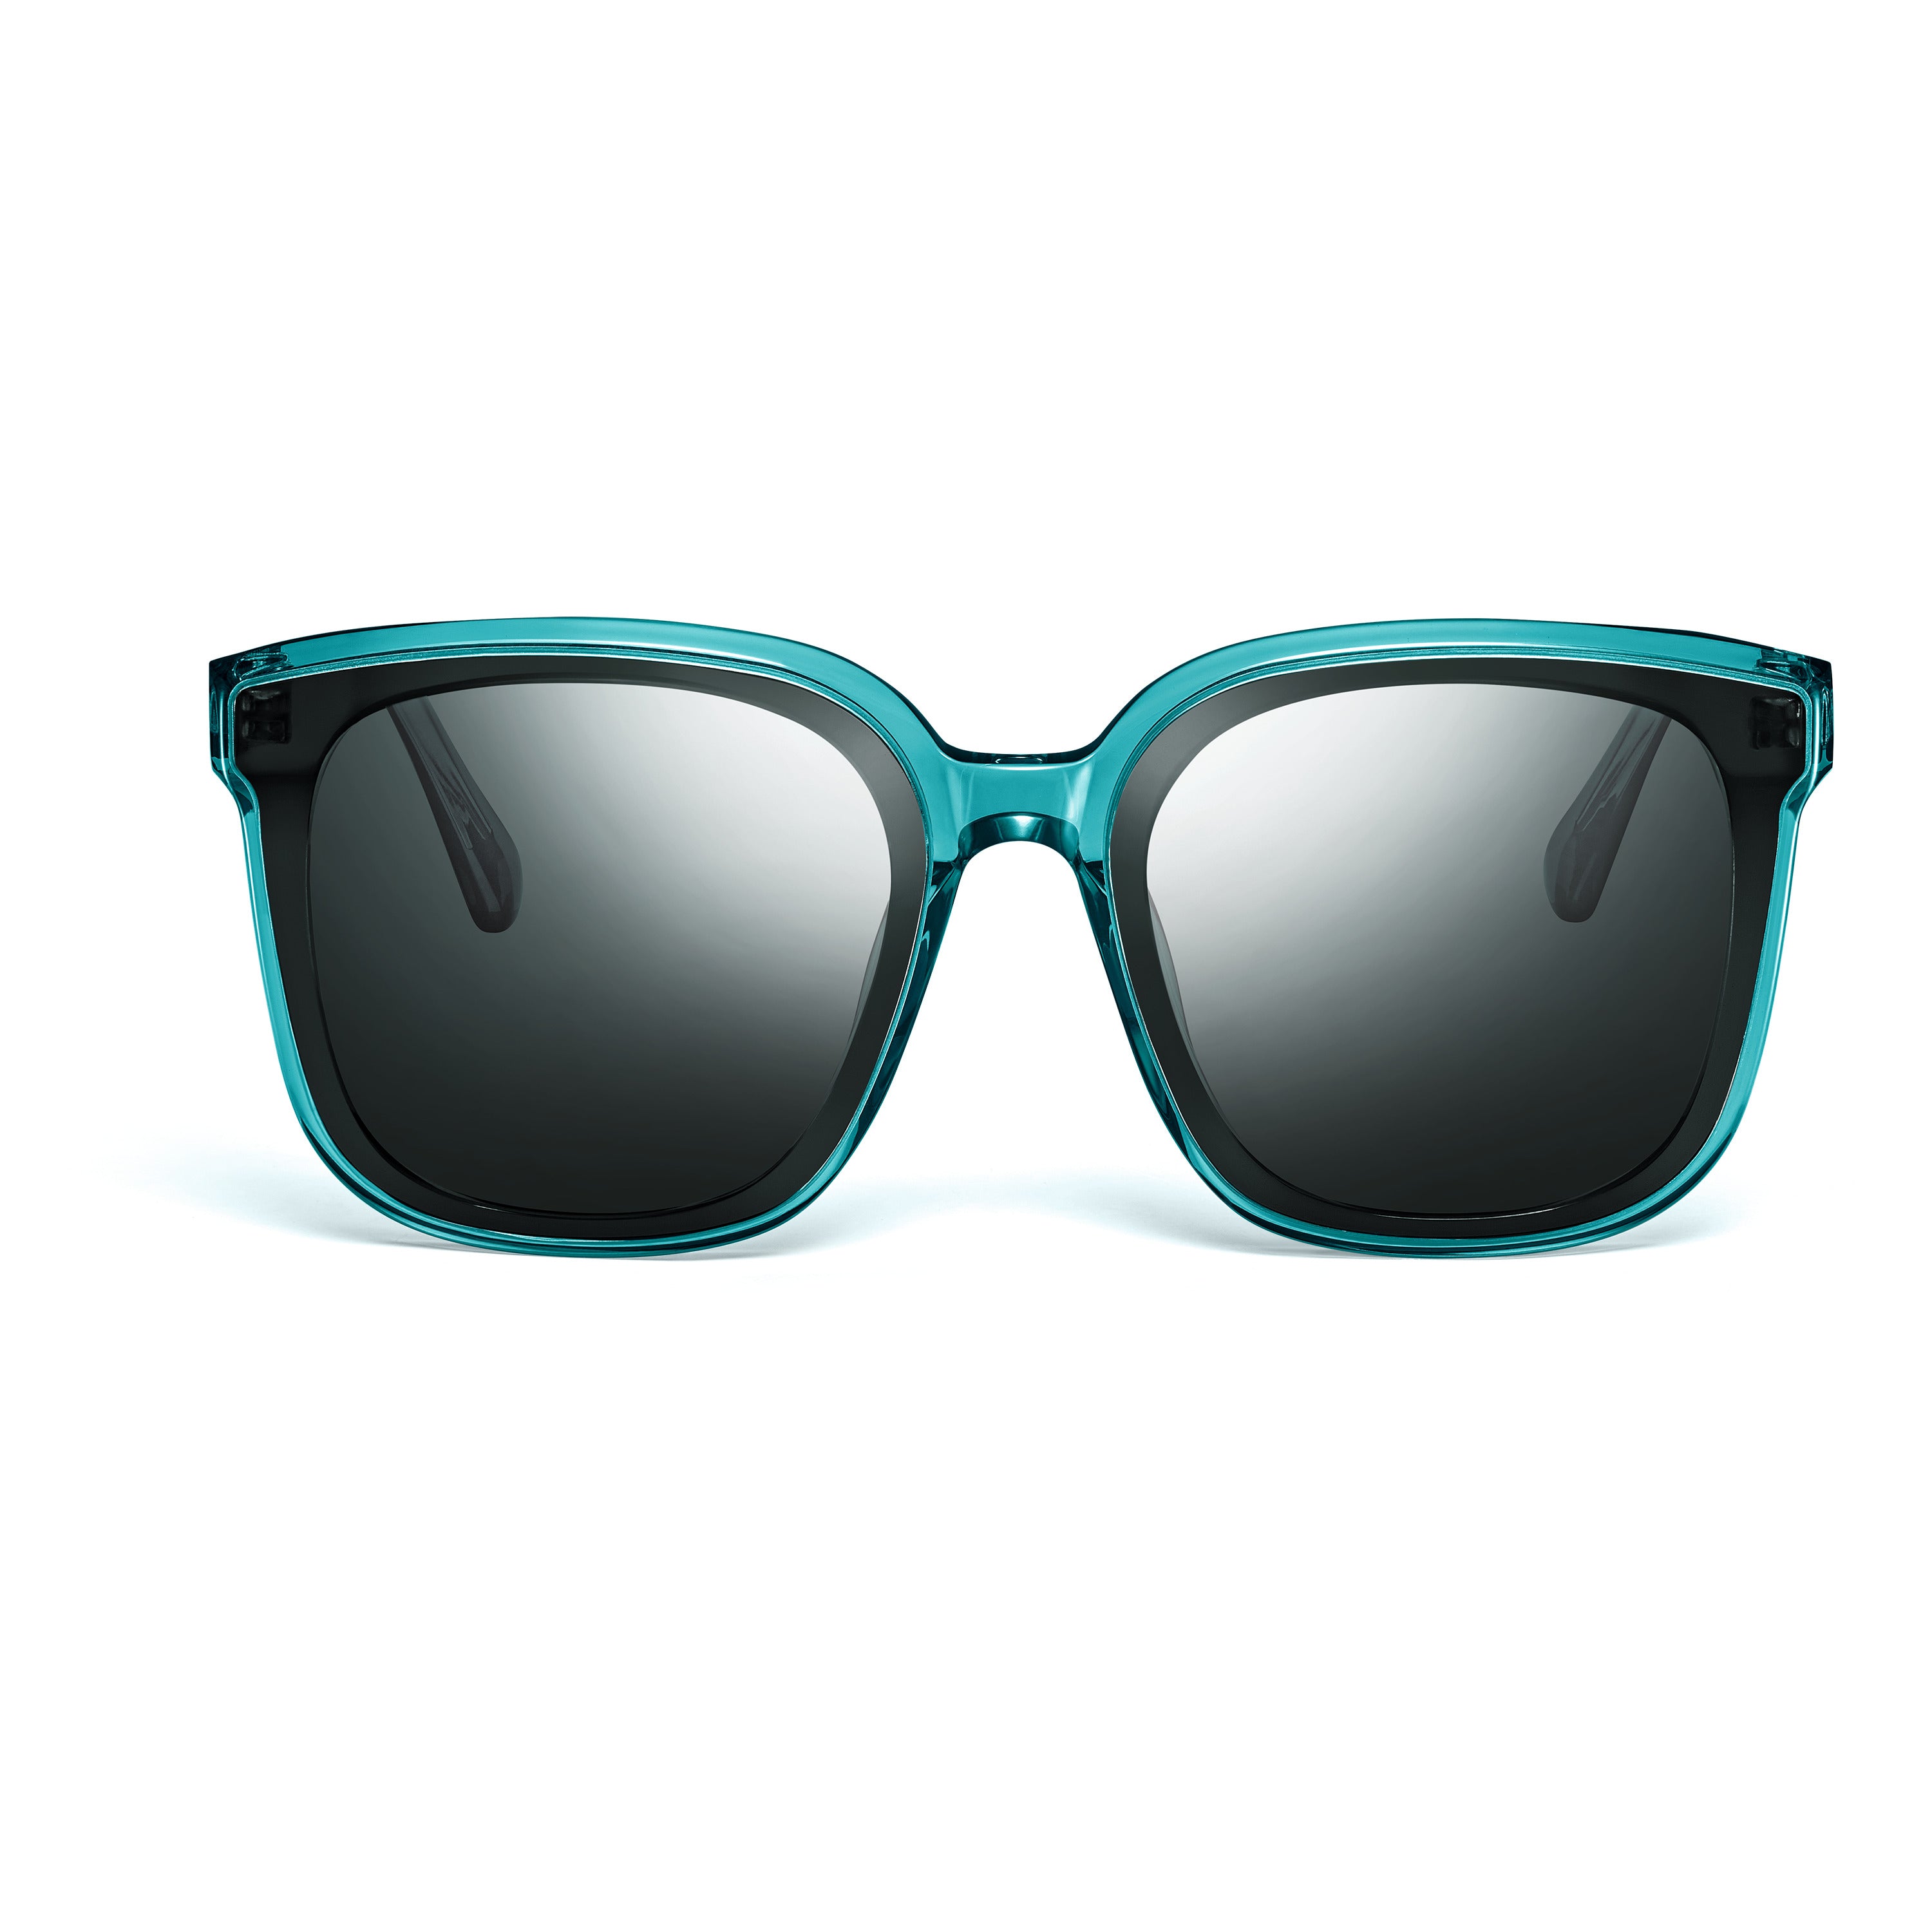 TURQUOISE CLASSIC SUNGLASSES - 4B Watches